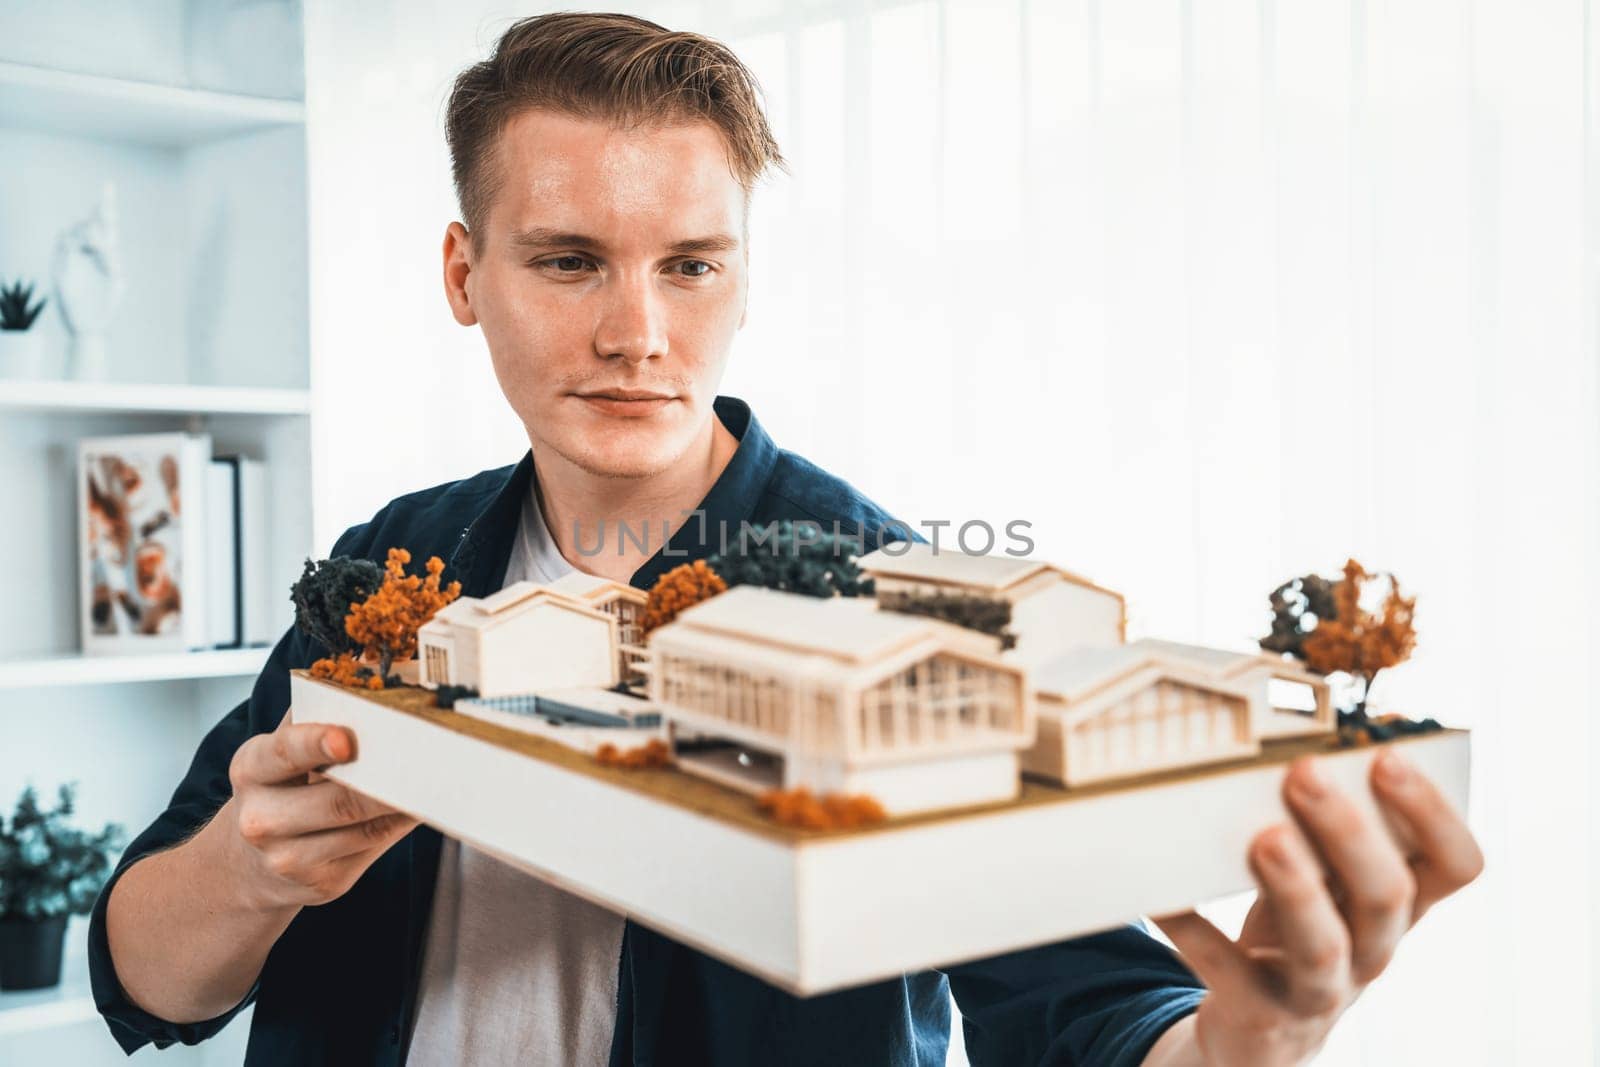 Architect designer studies elegant while holding house model, reviewing structure design for improvement with construction plan on table. Creativity and innovation in architectural design. Iteration